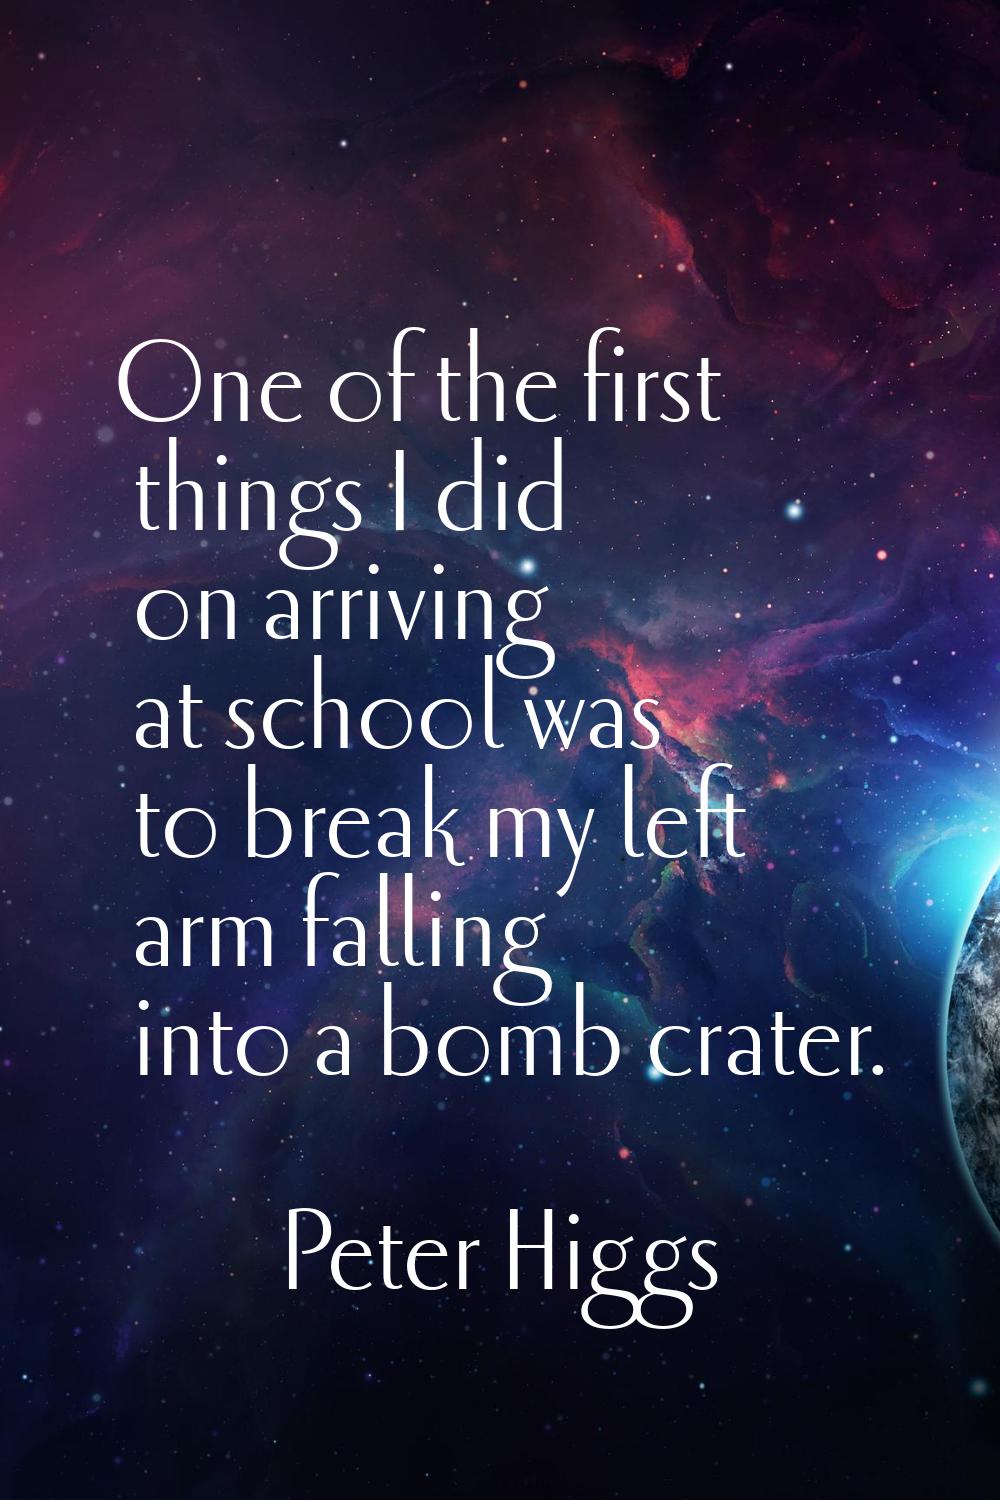 One of the first things I did on arriving at school was to break my left arm falling into a bomb cr